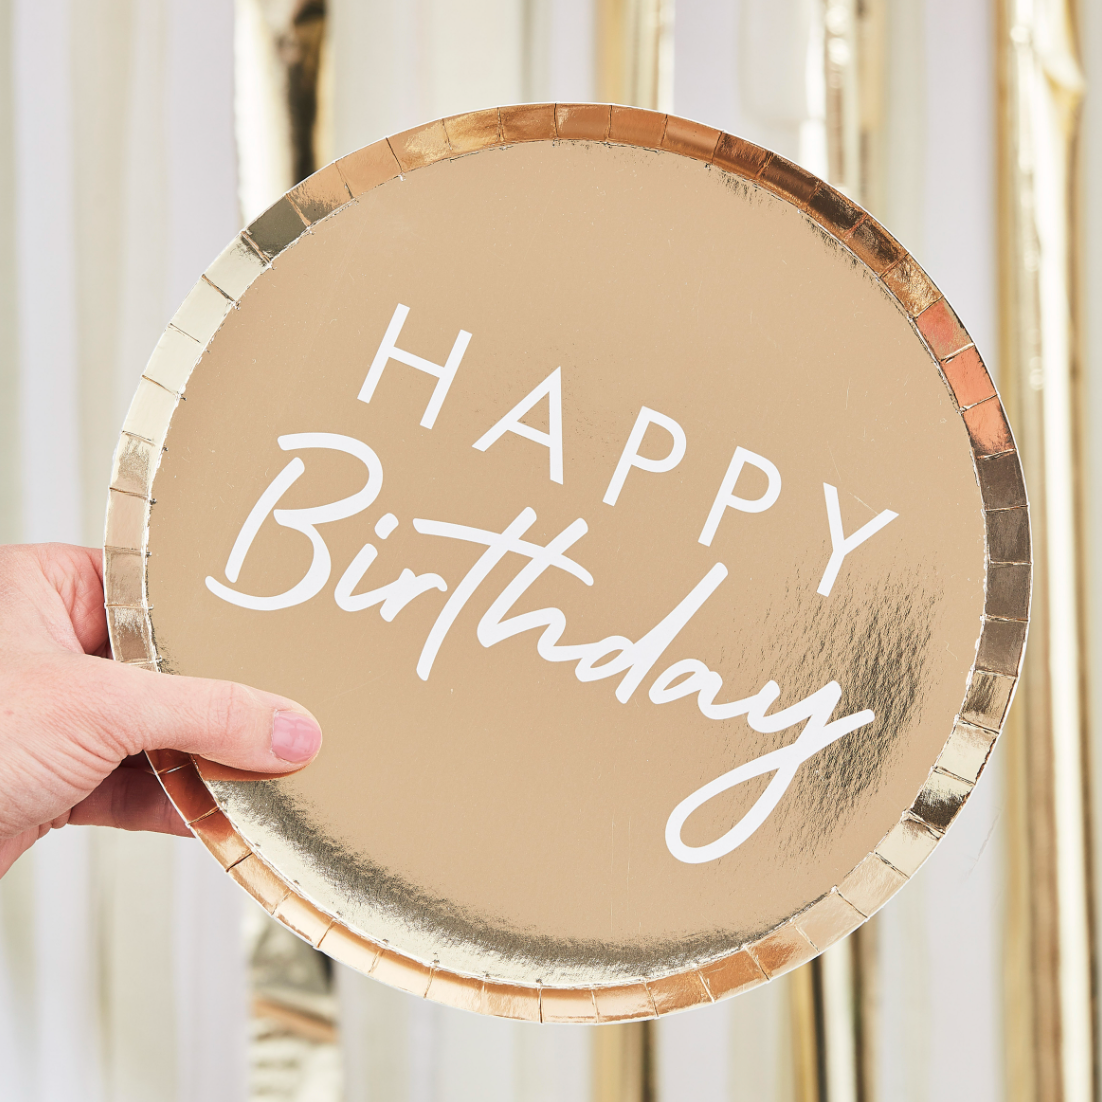 Gold Foiled Large Happy Birthday Plates